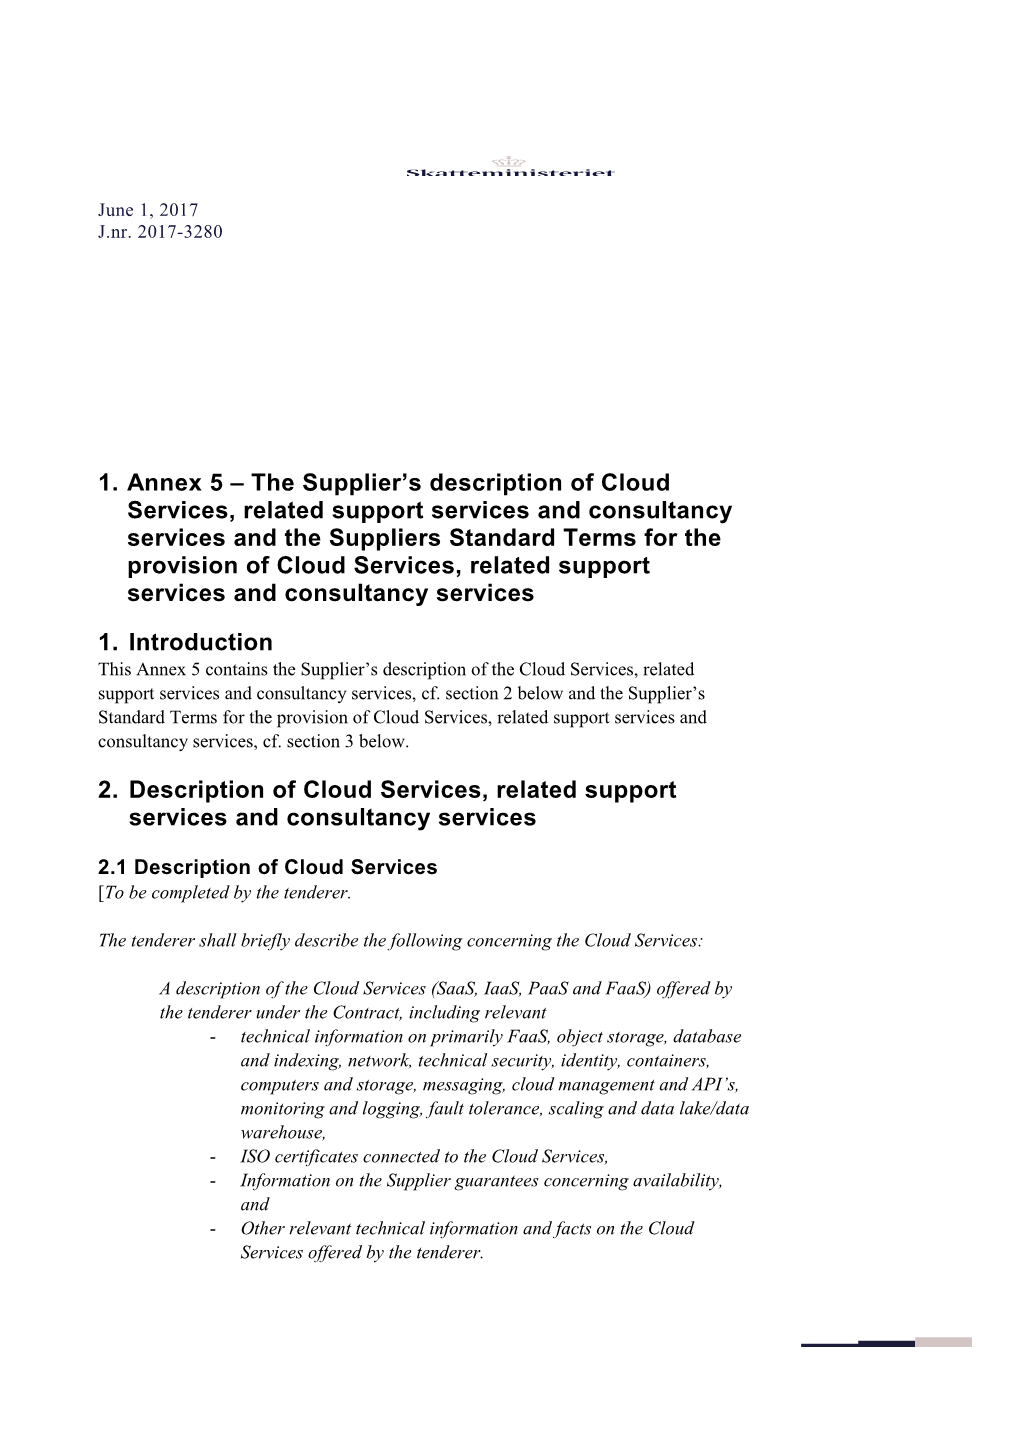 2. Description of Cloud Services, Related Support Services and Consultancy Services